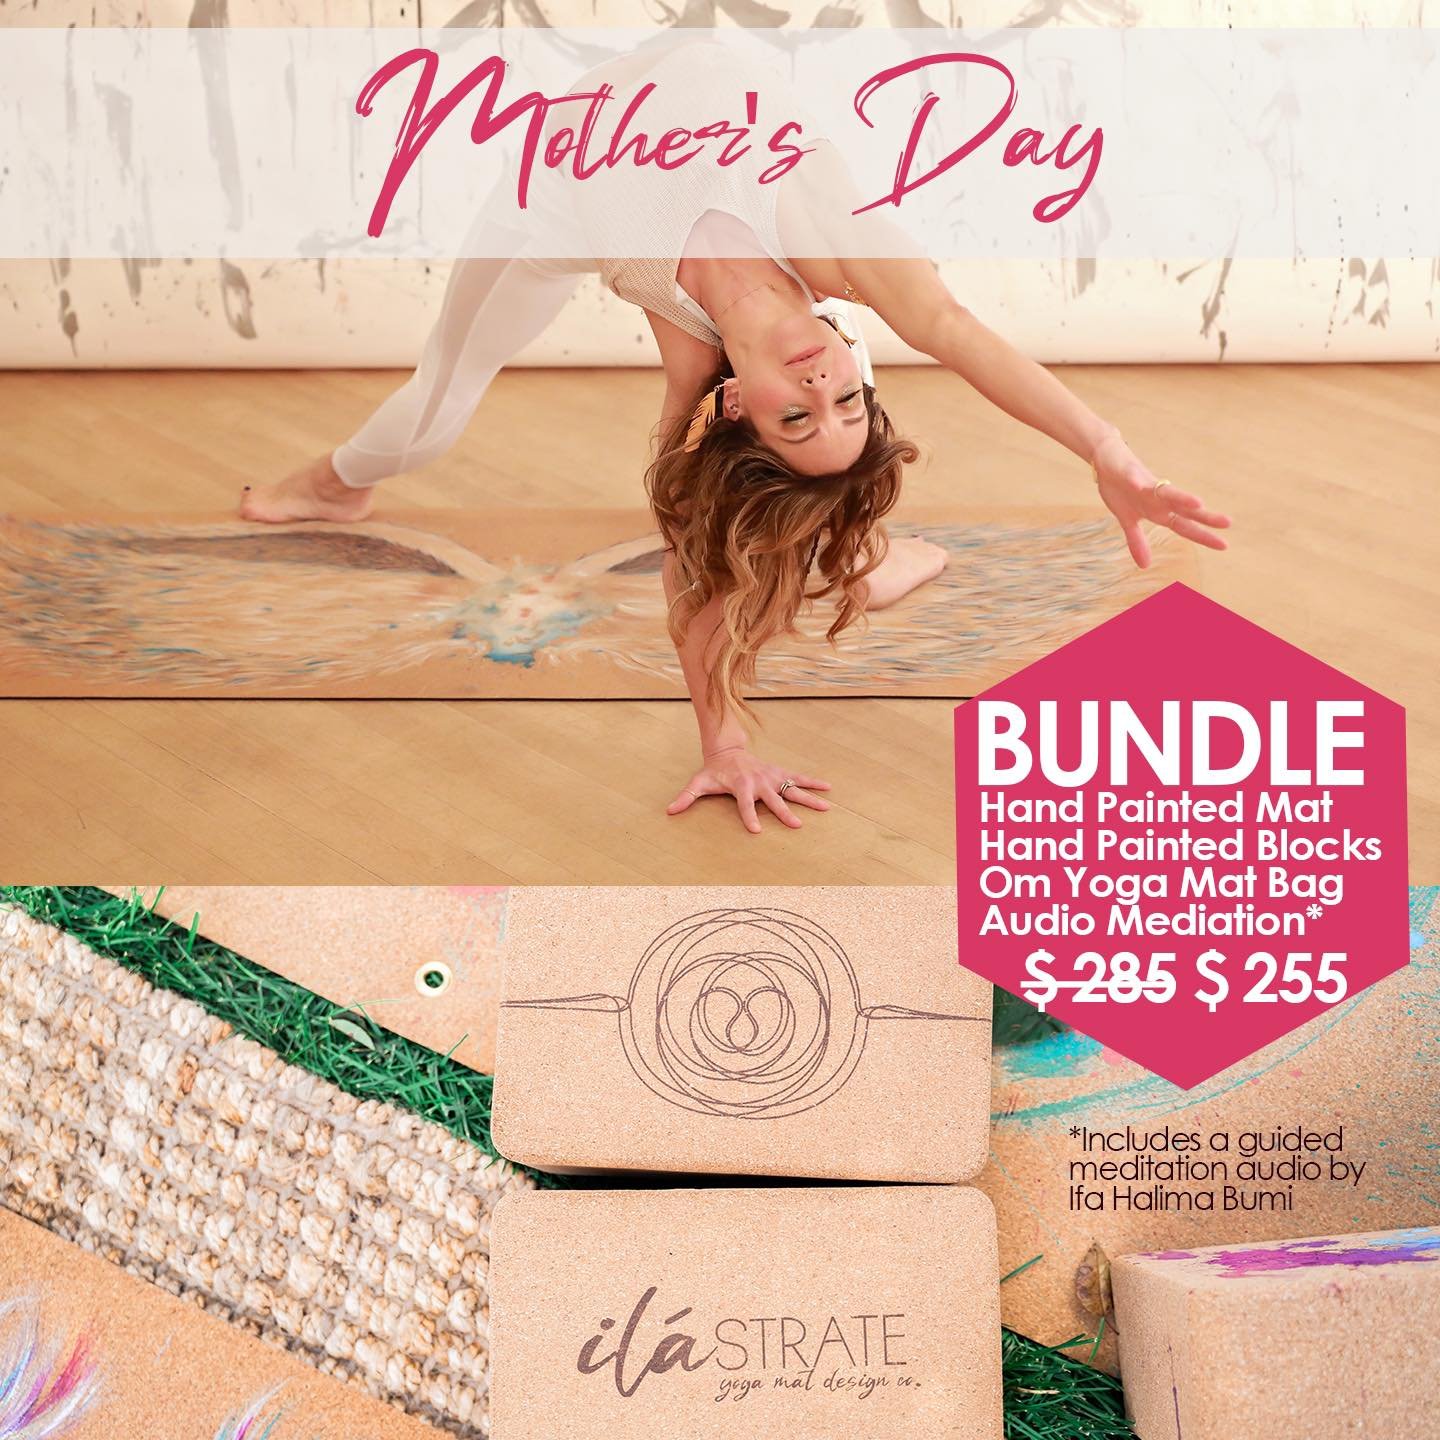 Bundle it up for Mom! Expand + Activate her practice.

This Mother&rsquo;s Day package is so special, celebrating all Mothers, including Mother Gaia. This bundle includes an audio track by @dj_bumi for meditation and plant healing- from the album &ld